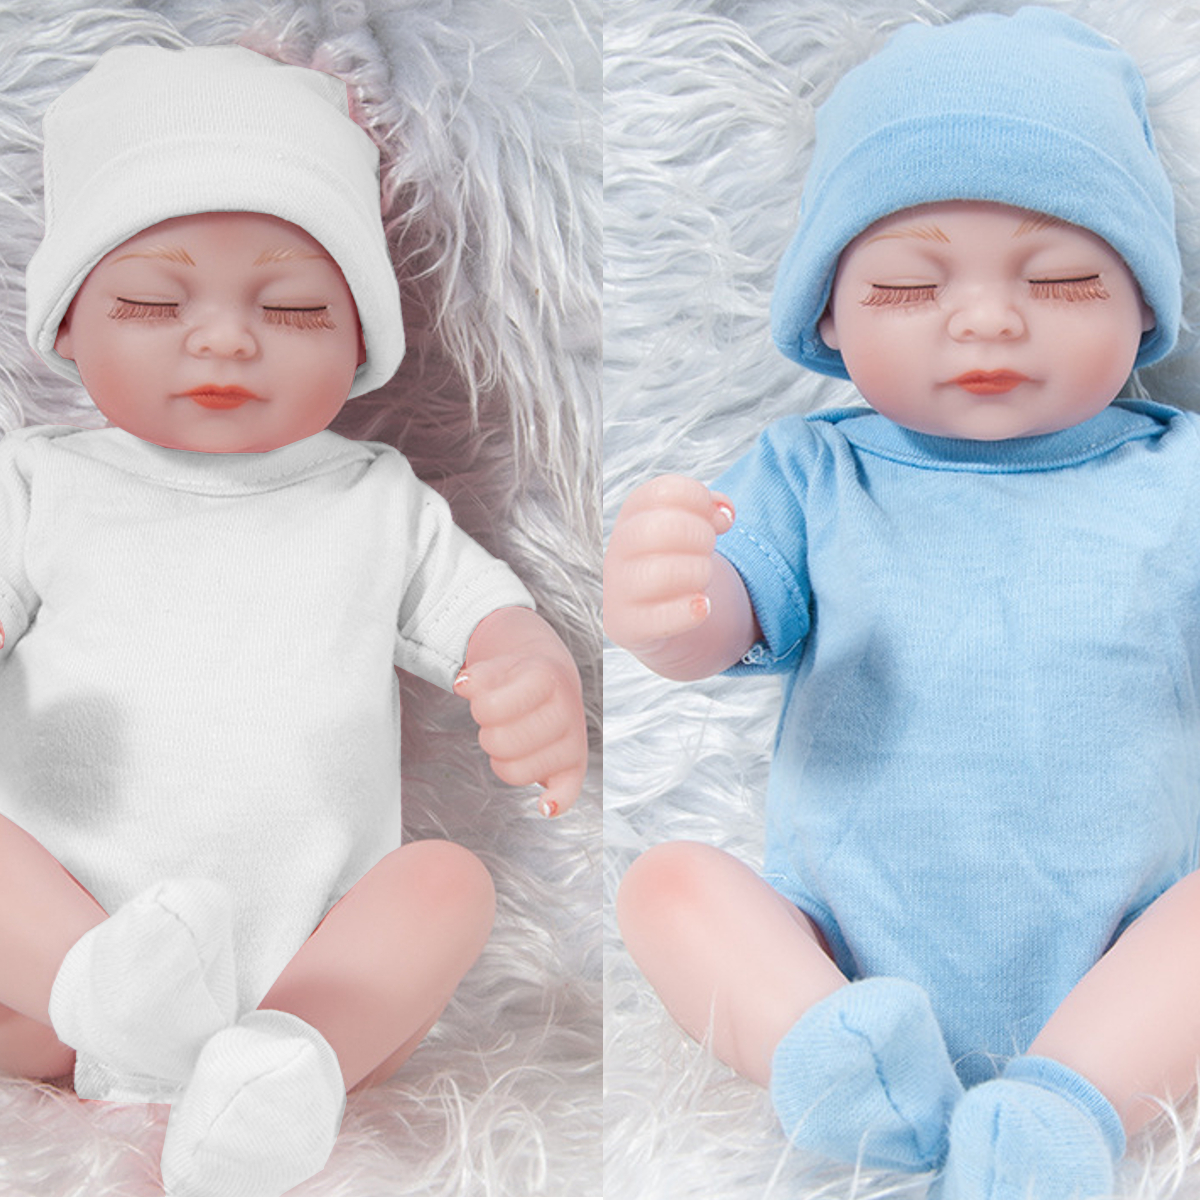 28CM-Soft-Silicone-Realistic-Sleeping-Reborns-Lifelikes-Newborns-Baby-Doll-Toy-with-Moveable-Head-Ar-1891375-4